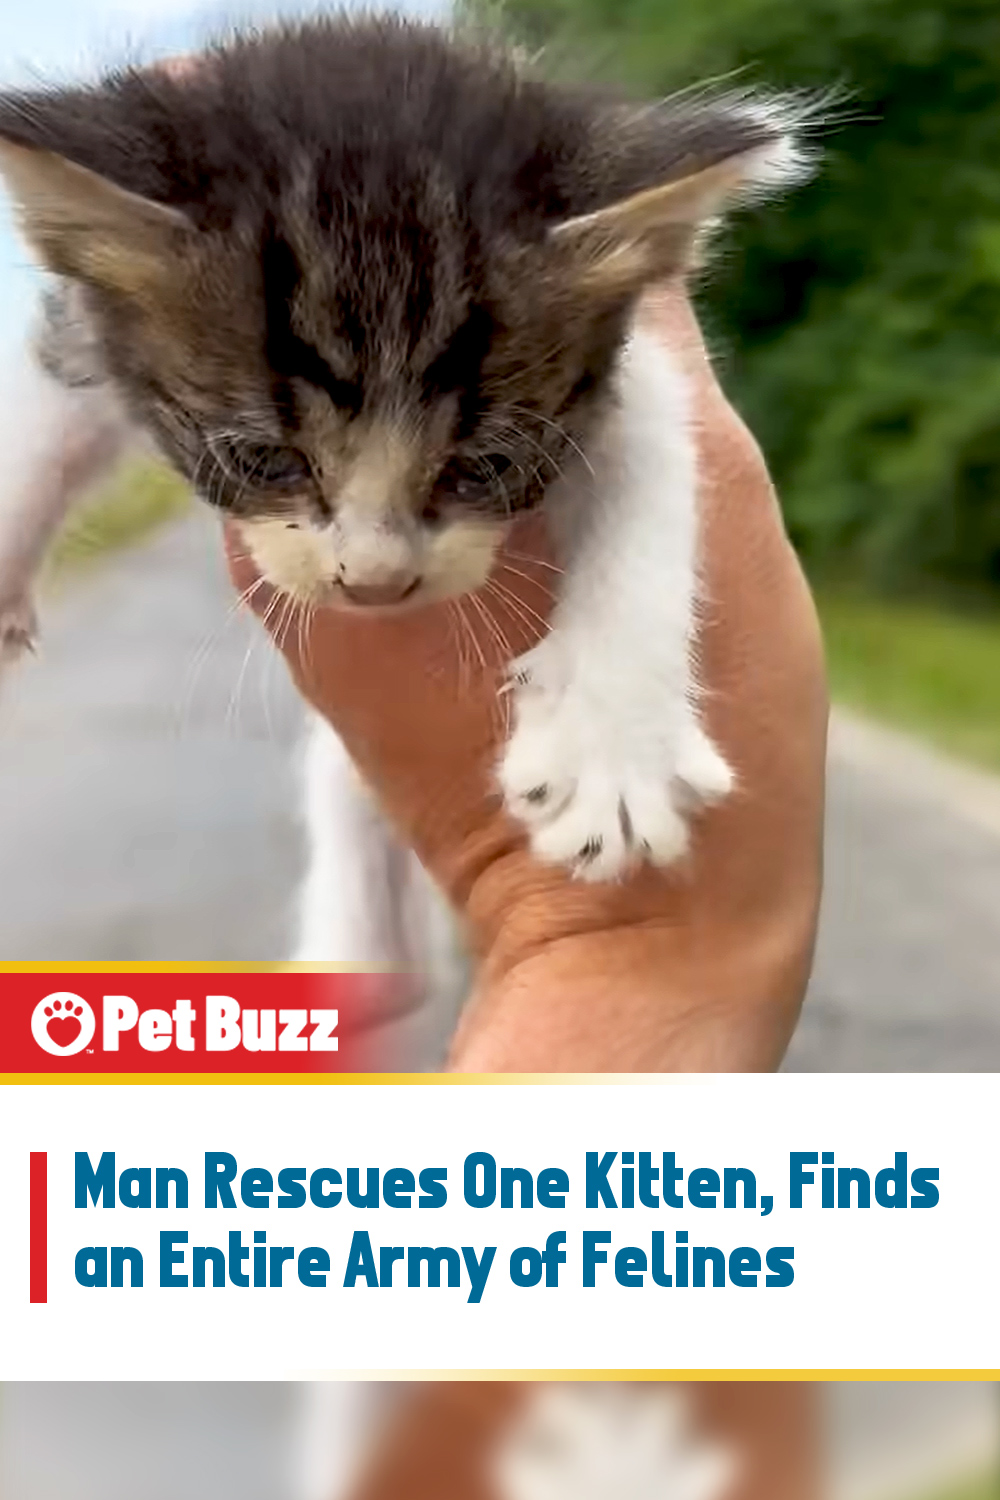 Man Rescues One Kitten, Finds an Entire Army of Felines